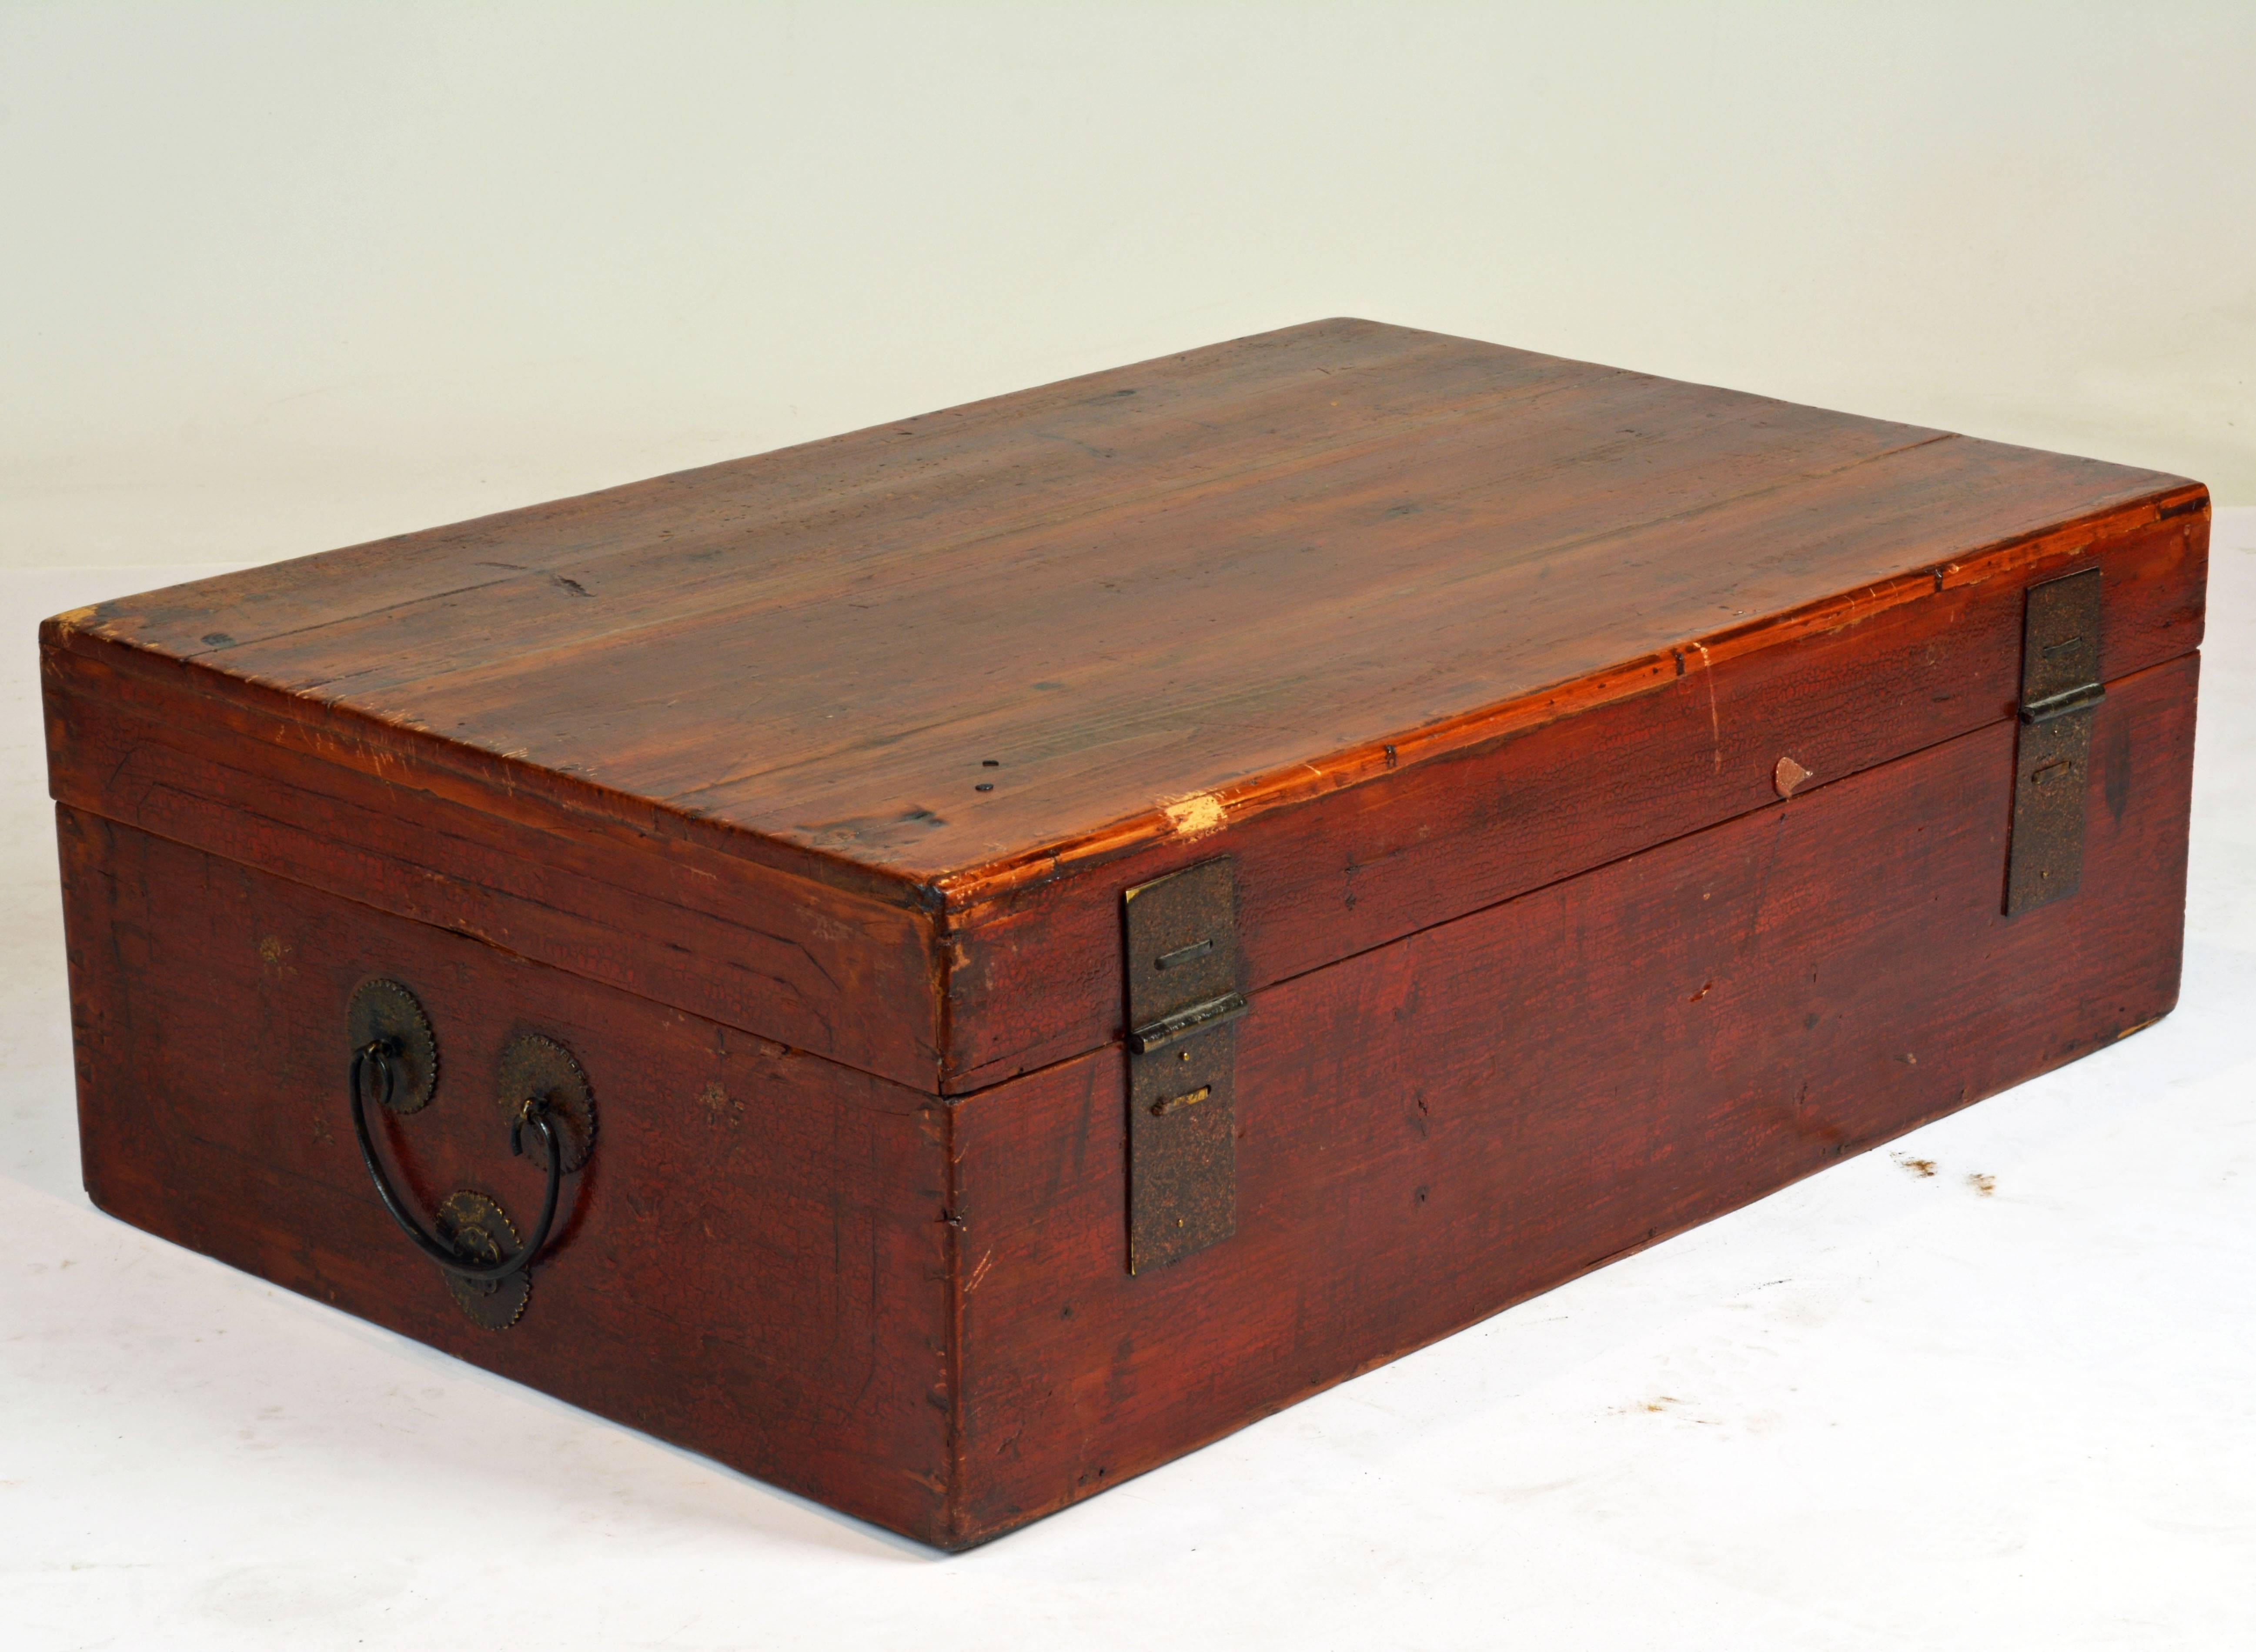 Measuring 20 x 31 x 10inches this chest will also on a stand make a great coffee table. The chest features a pure design with original shaped and engraved lock plate and handles. It is retaining some of the original red lacquer and gilt making the